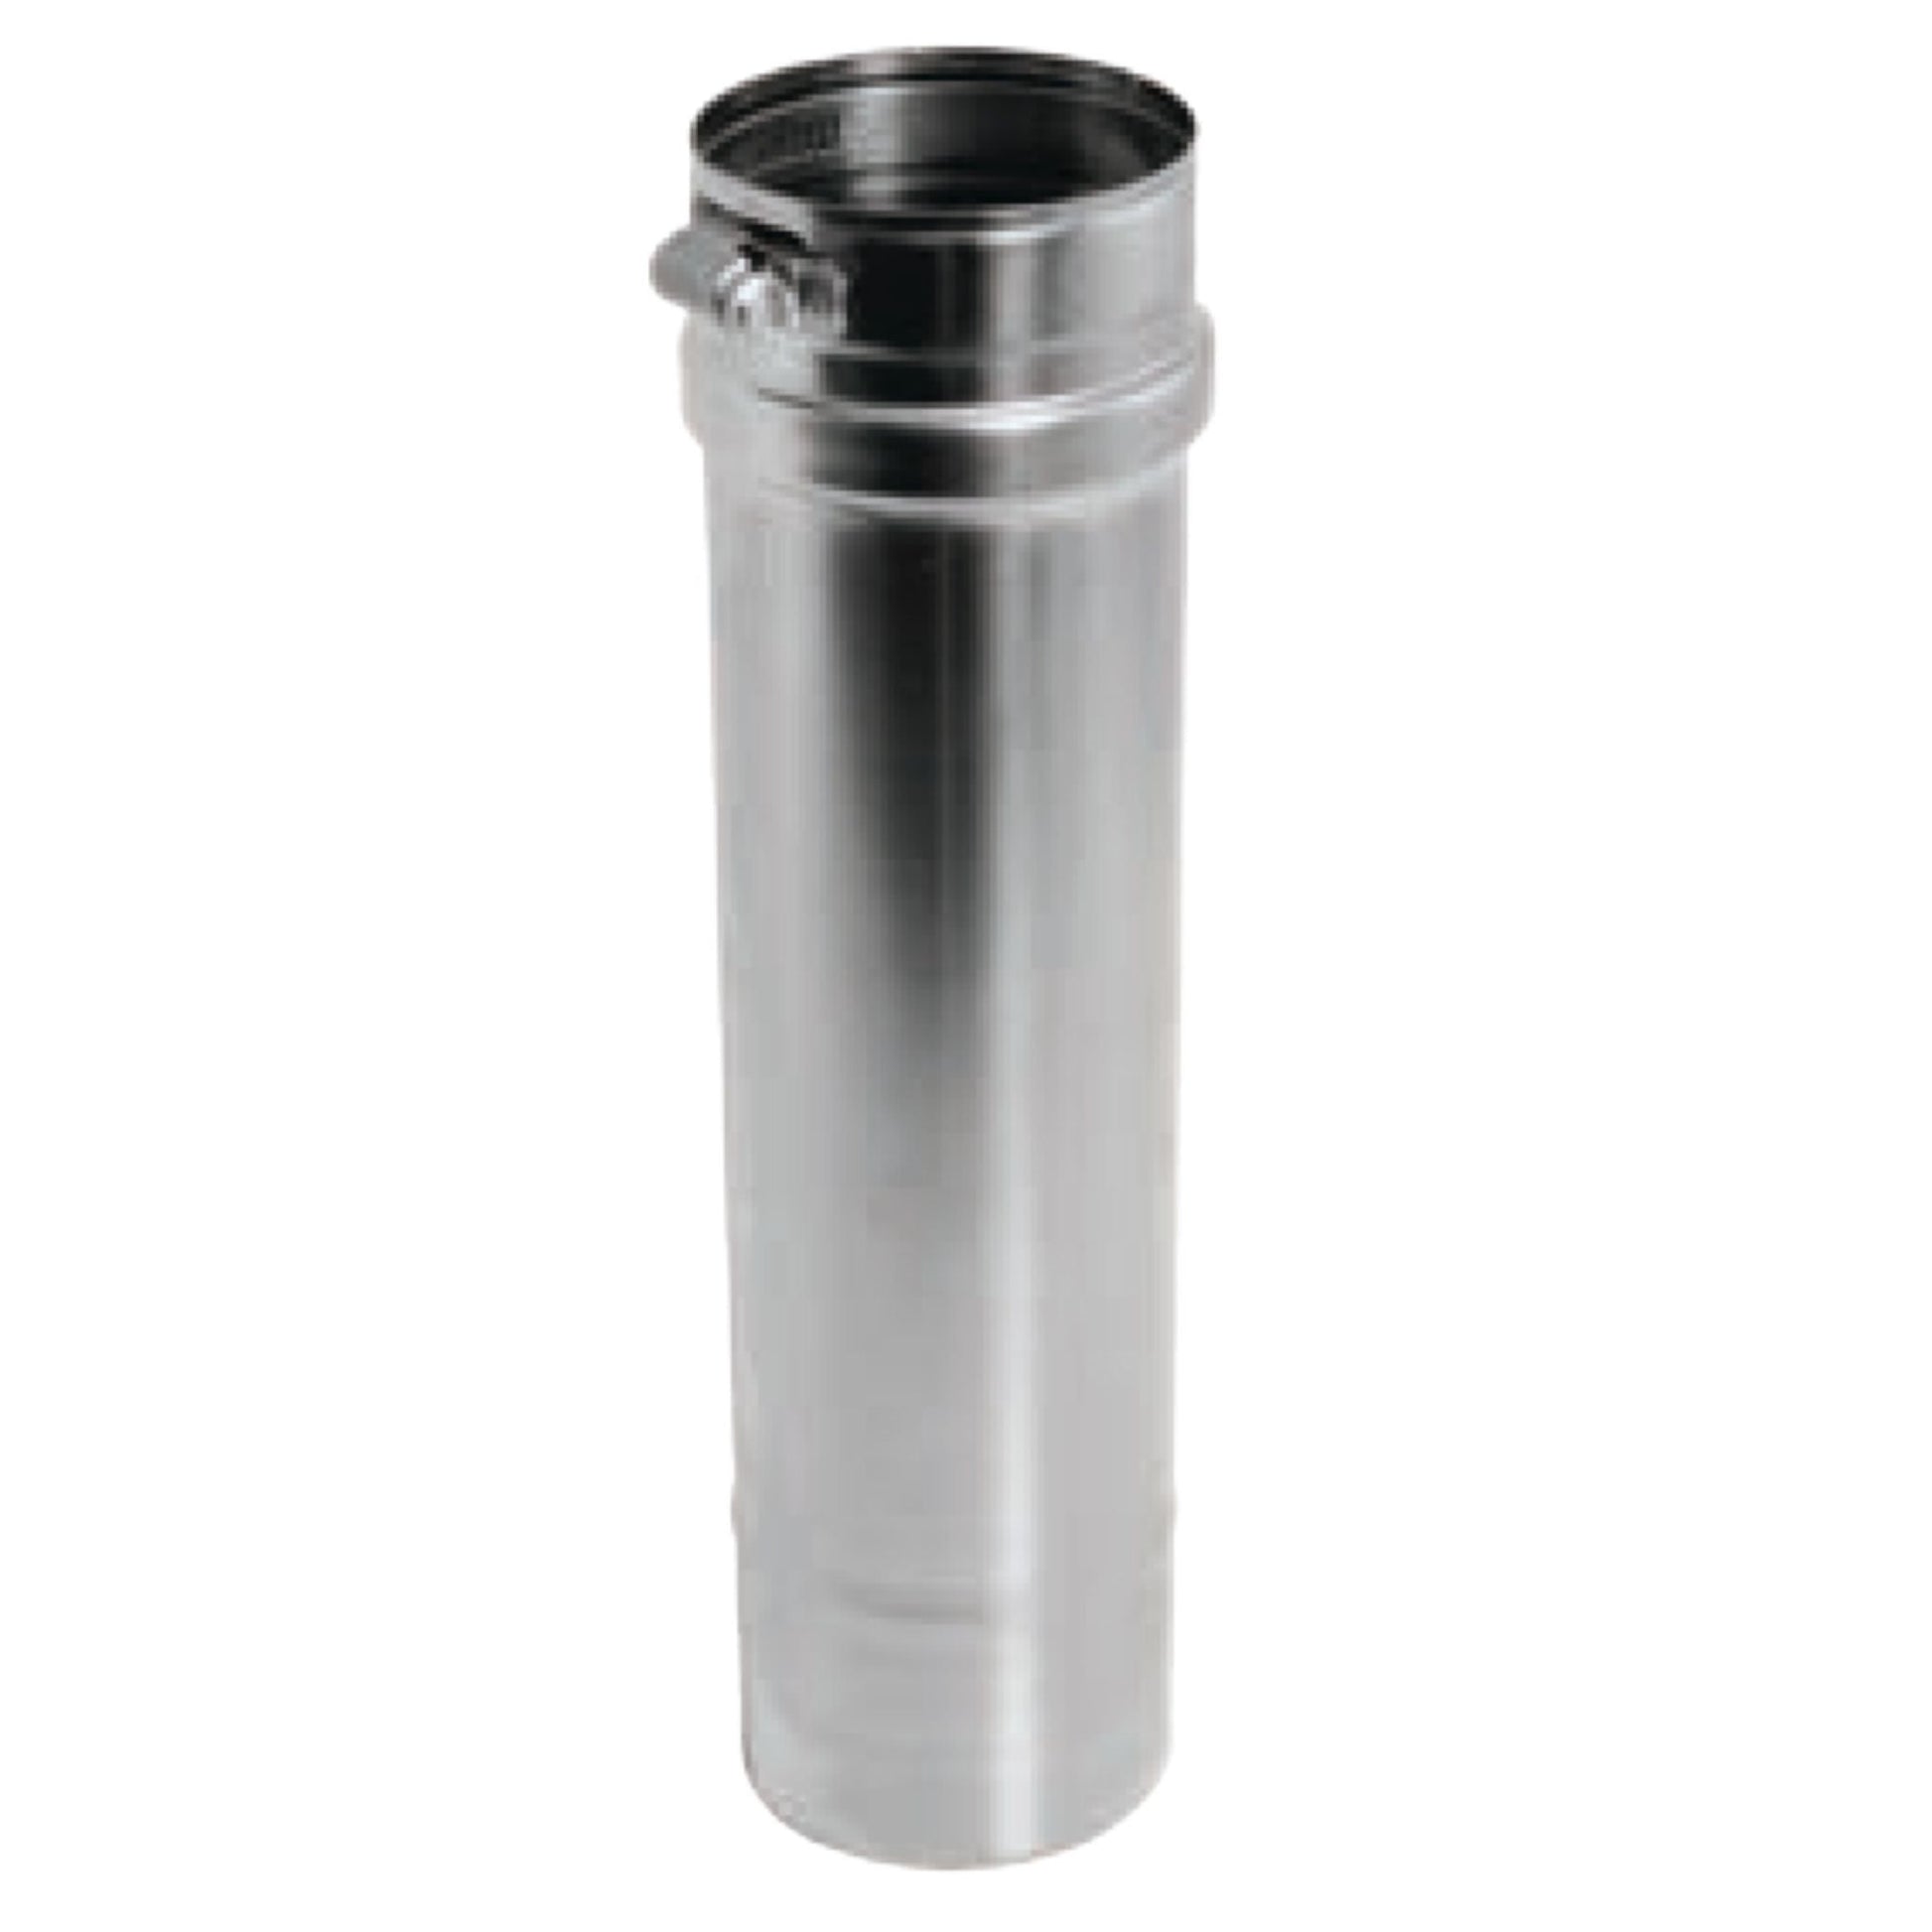 DuraVent FasNSeal 14" x 24" 316L Stainless Steel Vent Length